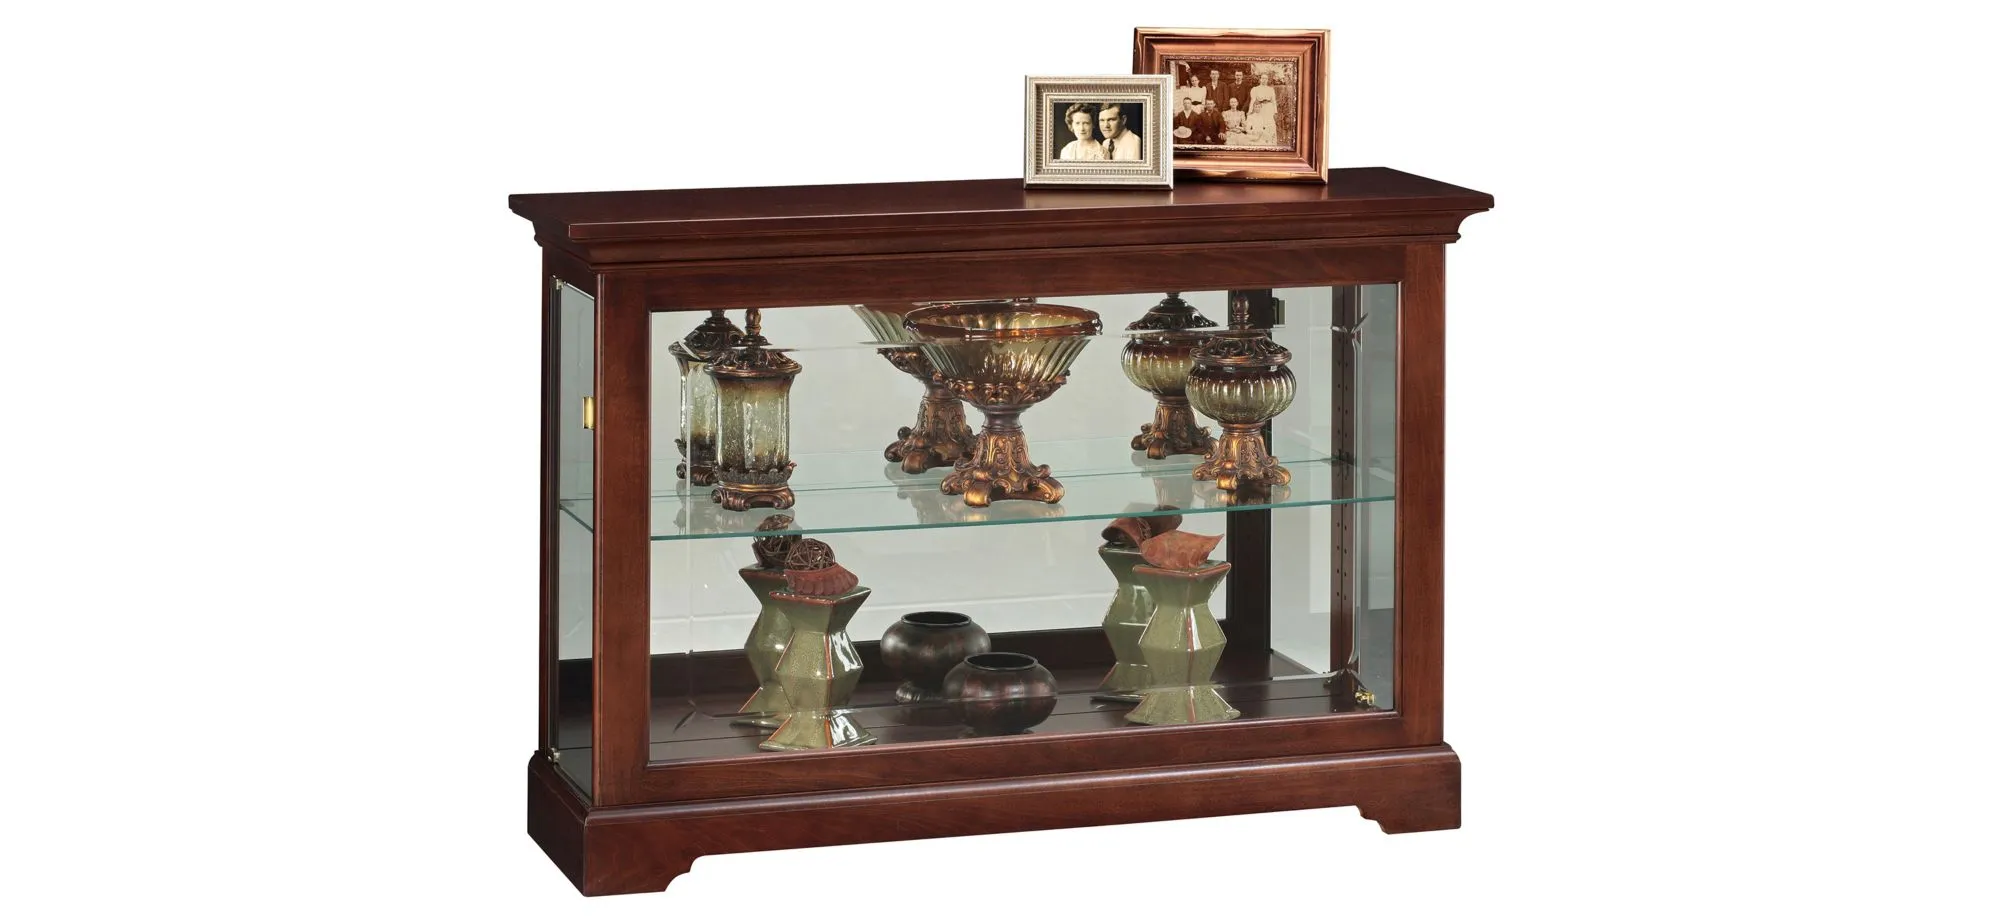 Underhill Curio Cabinet in Cherry Bordeaux by Howard Miller Clock